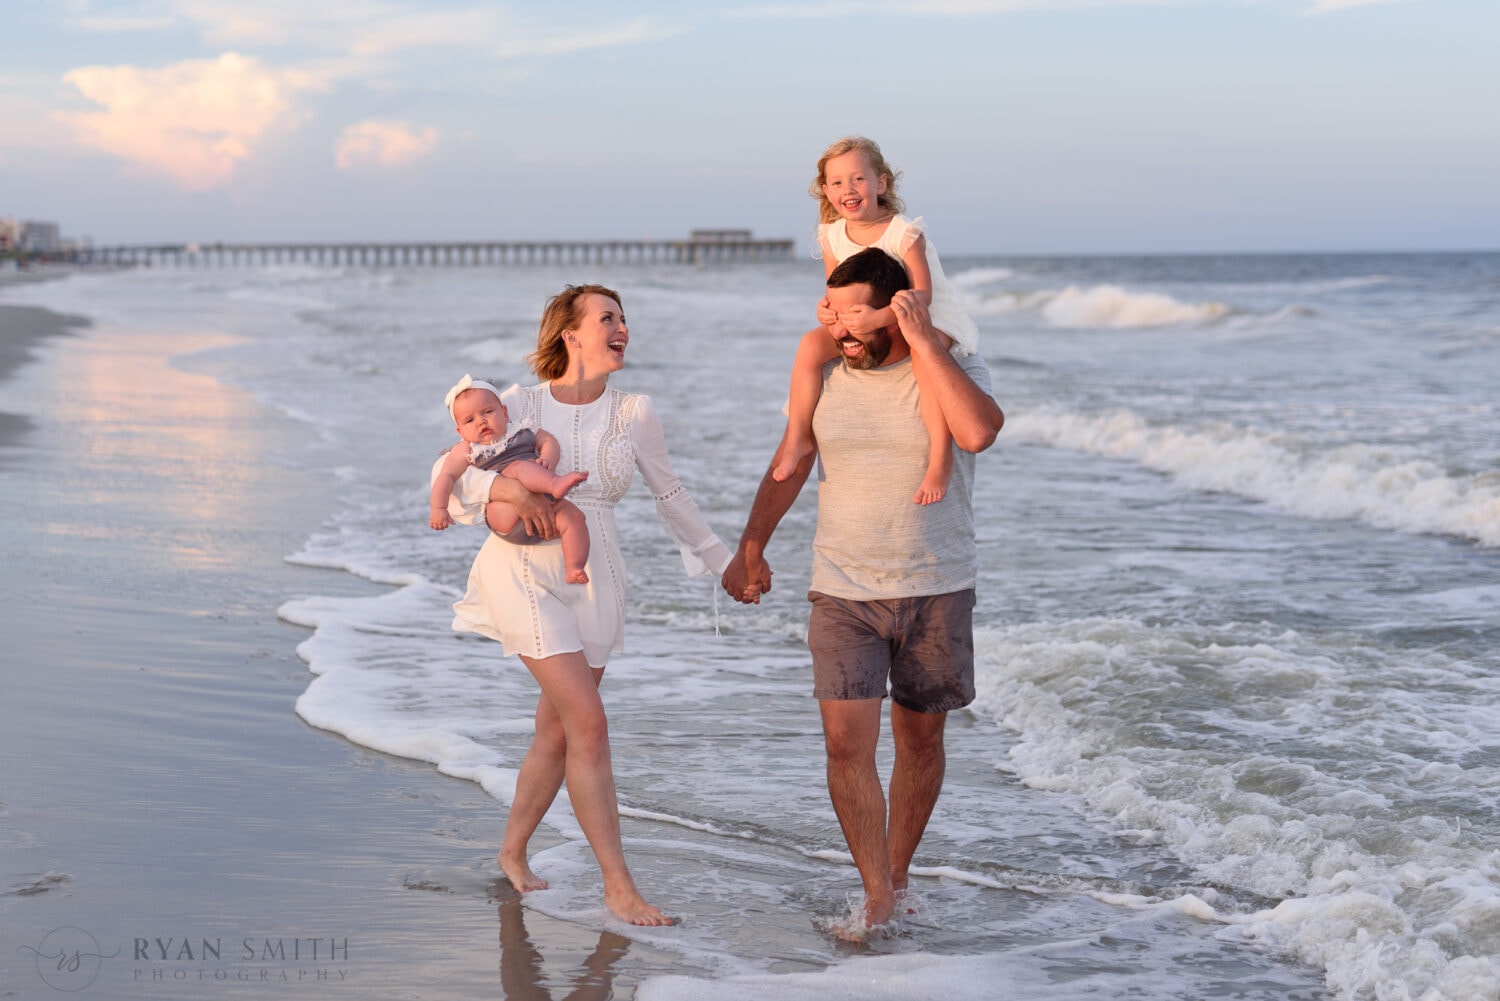 I had a lot of fun doing family pictures for another local photographer - Myrtle Beach State Park